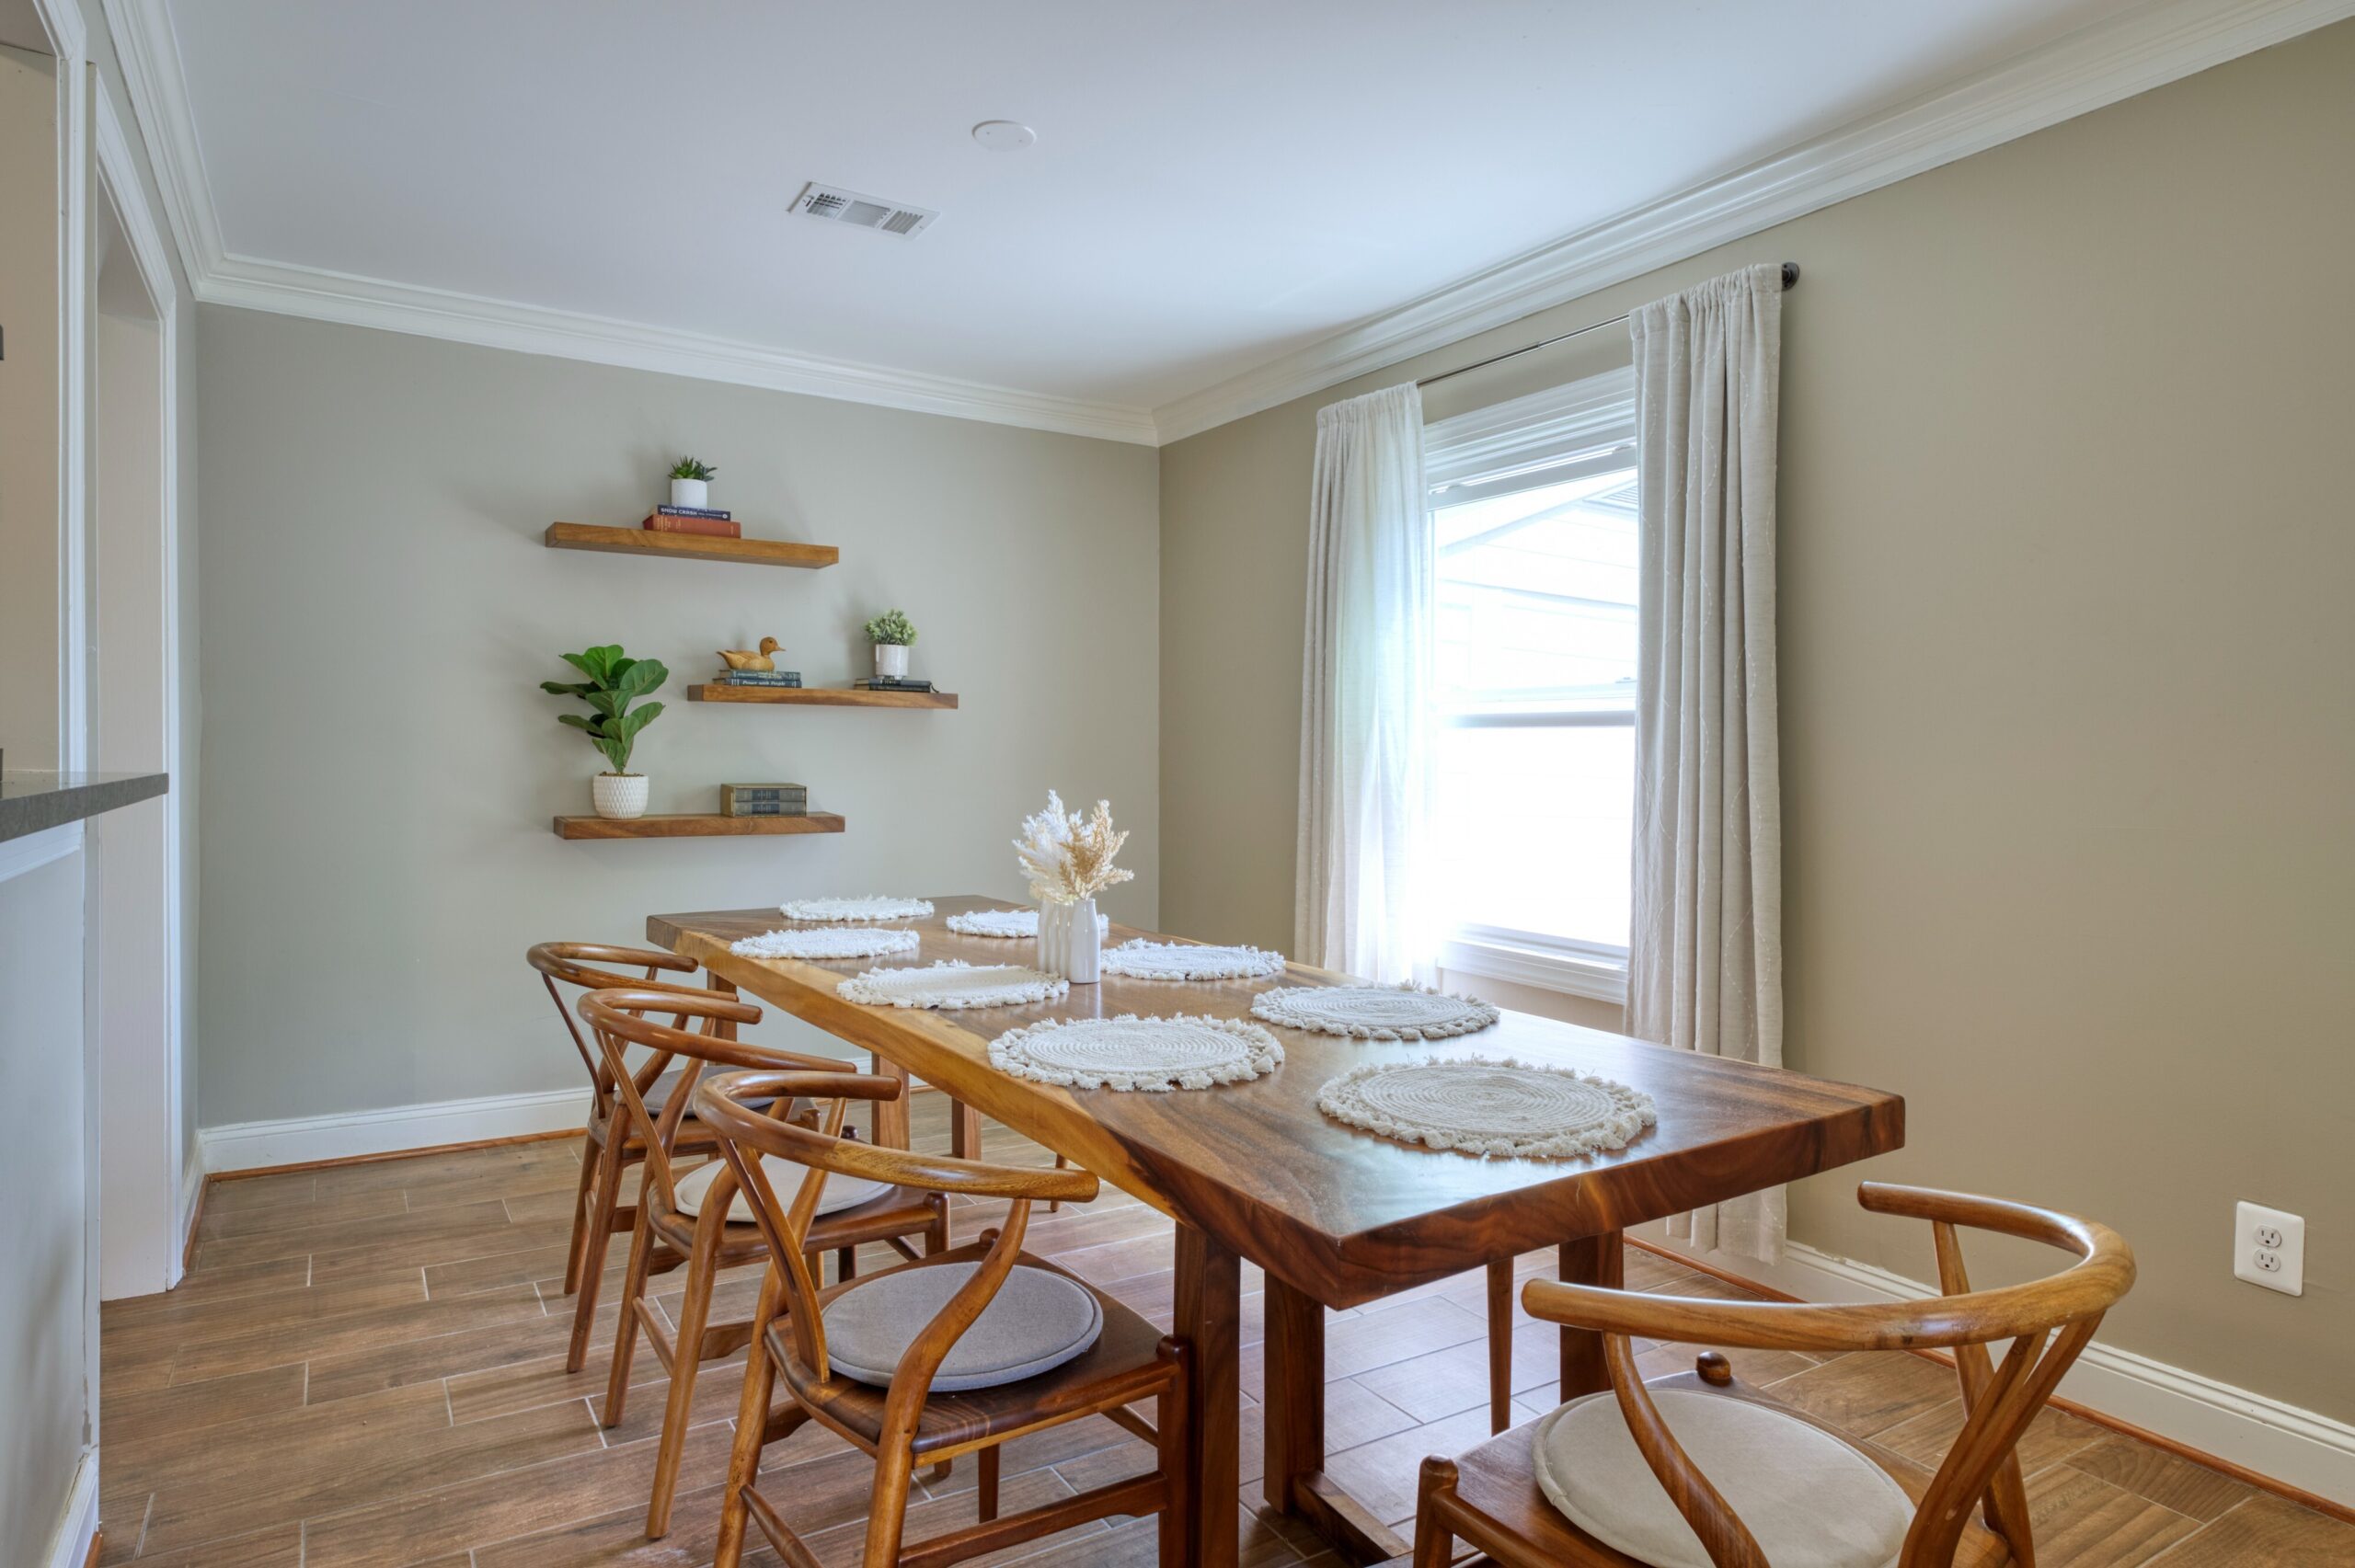 professional interior photo of 102 S Harrison Road, Sterling, VA - showing the dining area with floating shelves and hardwood floors